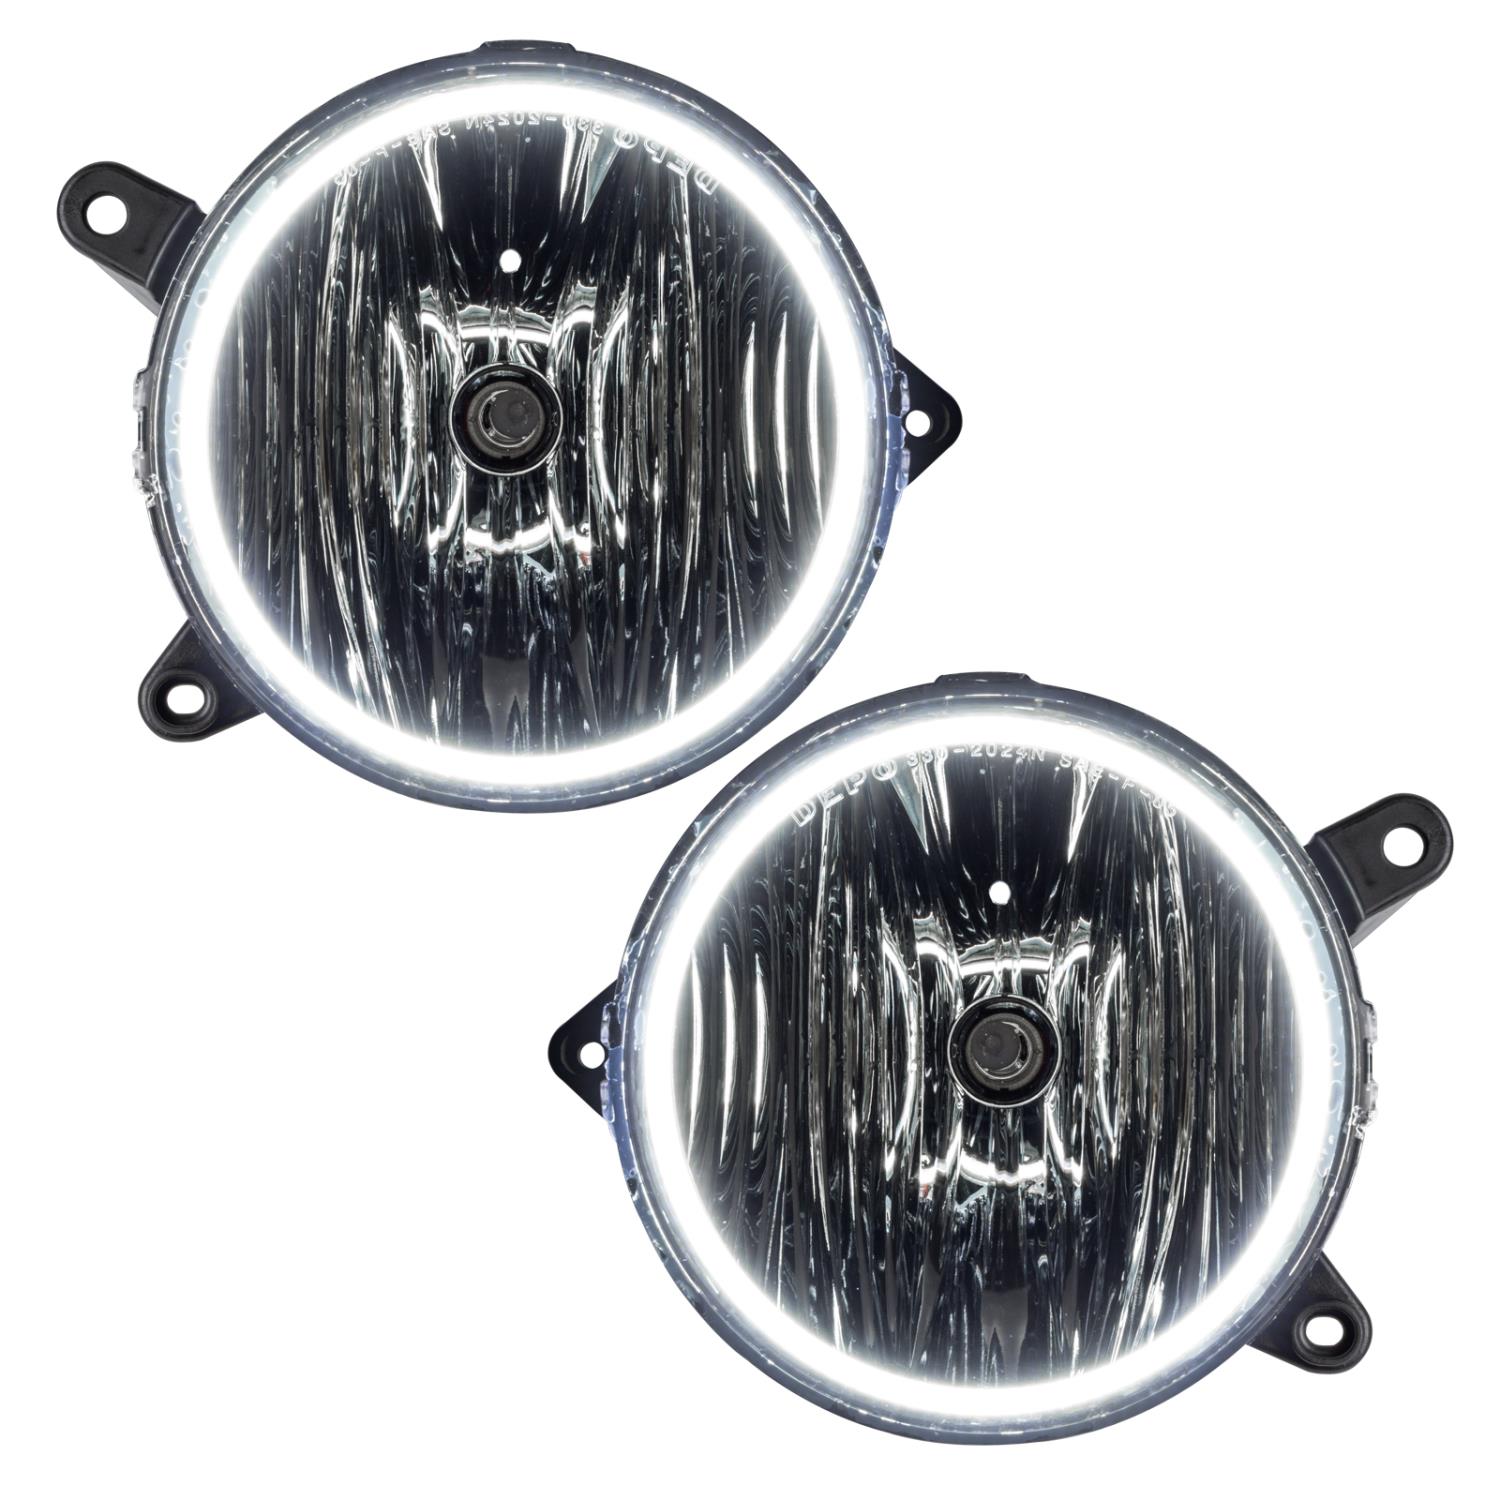 LED HALO Fog Light Assembly Comes with preinstalled